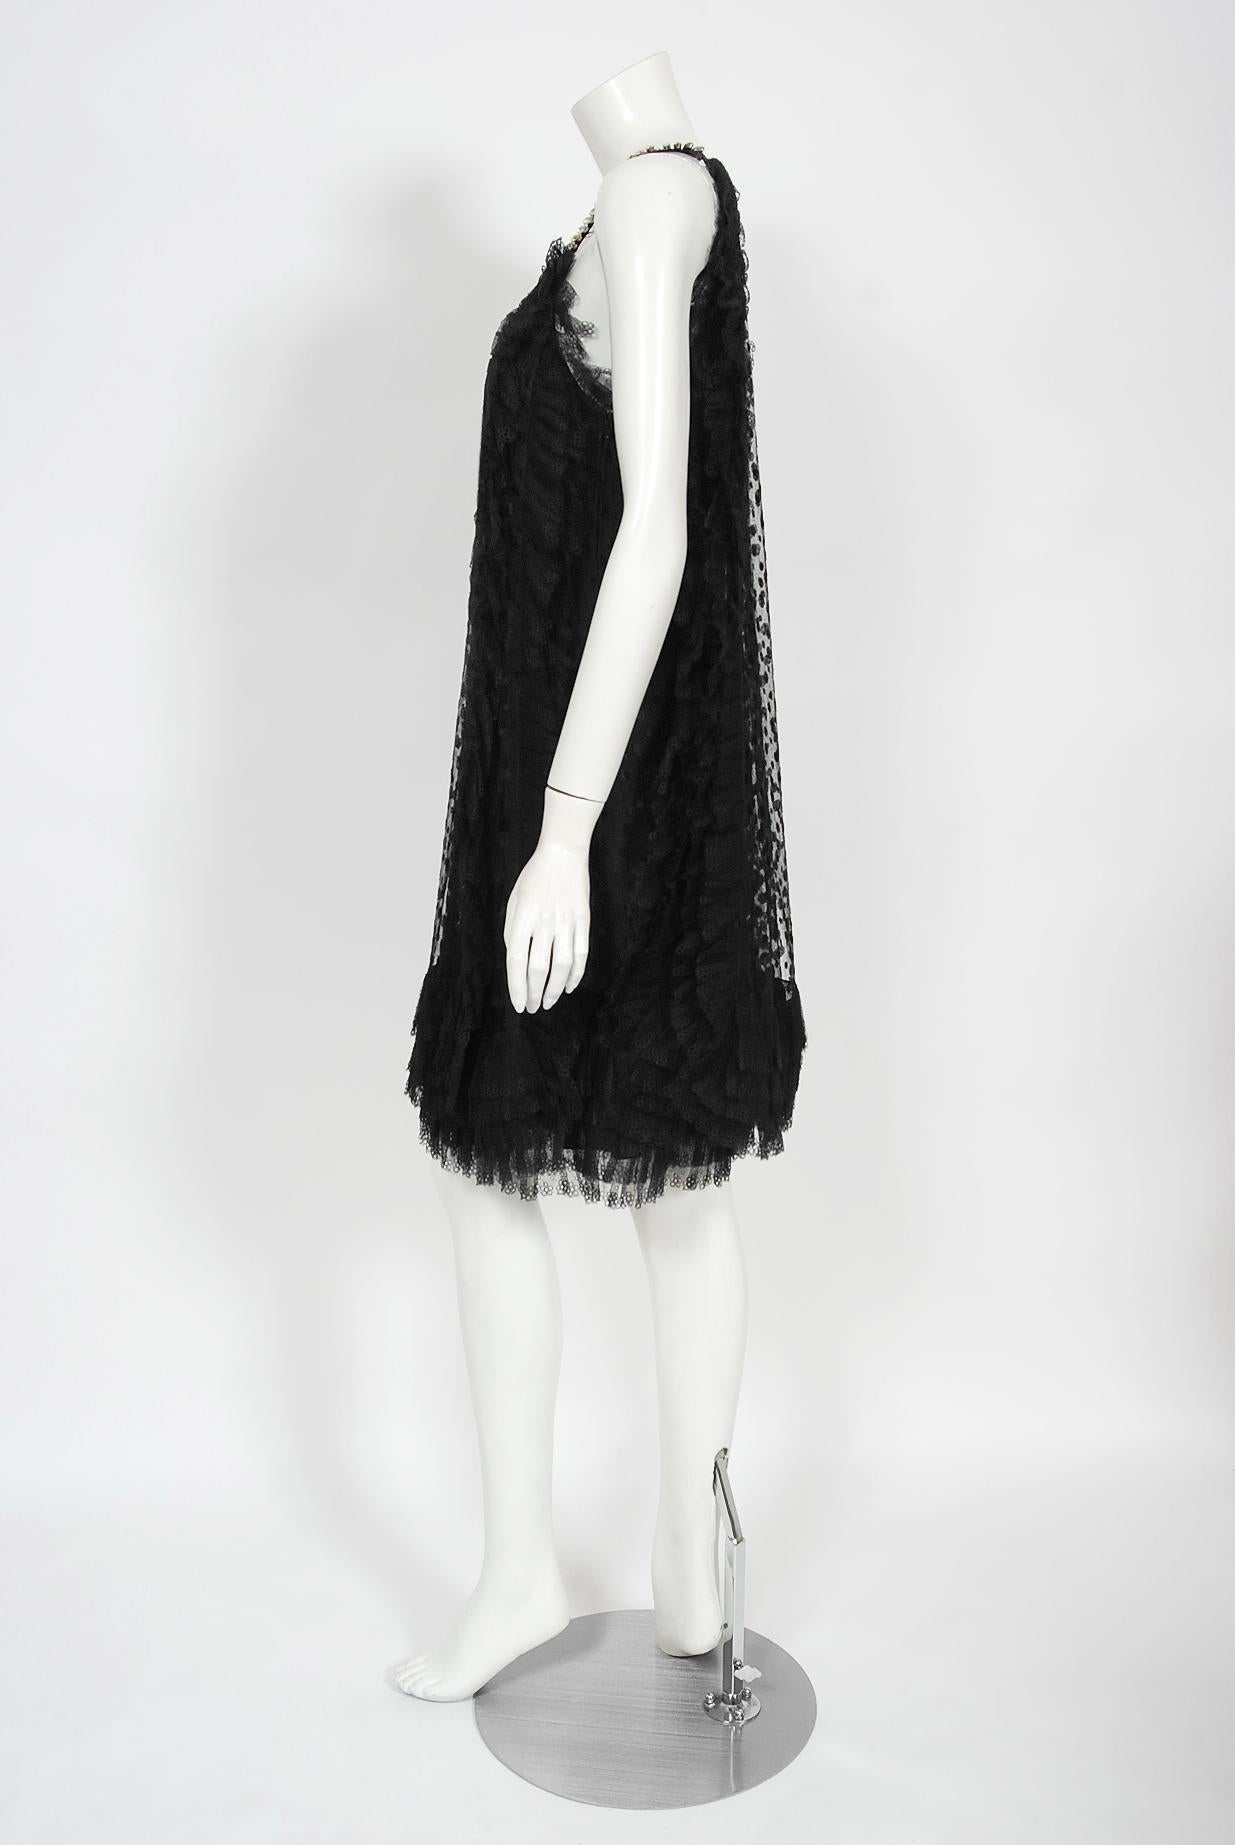 Vintage 1967 Galanos Couture Documented Black Polka-Dot Lace Mod Cocktail Dress 4